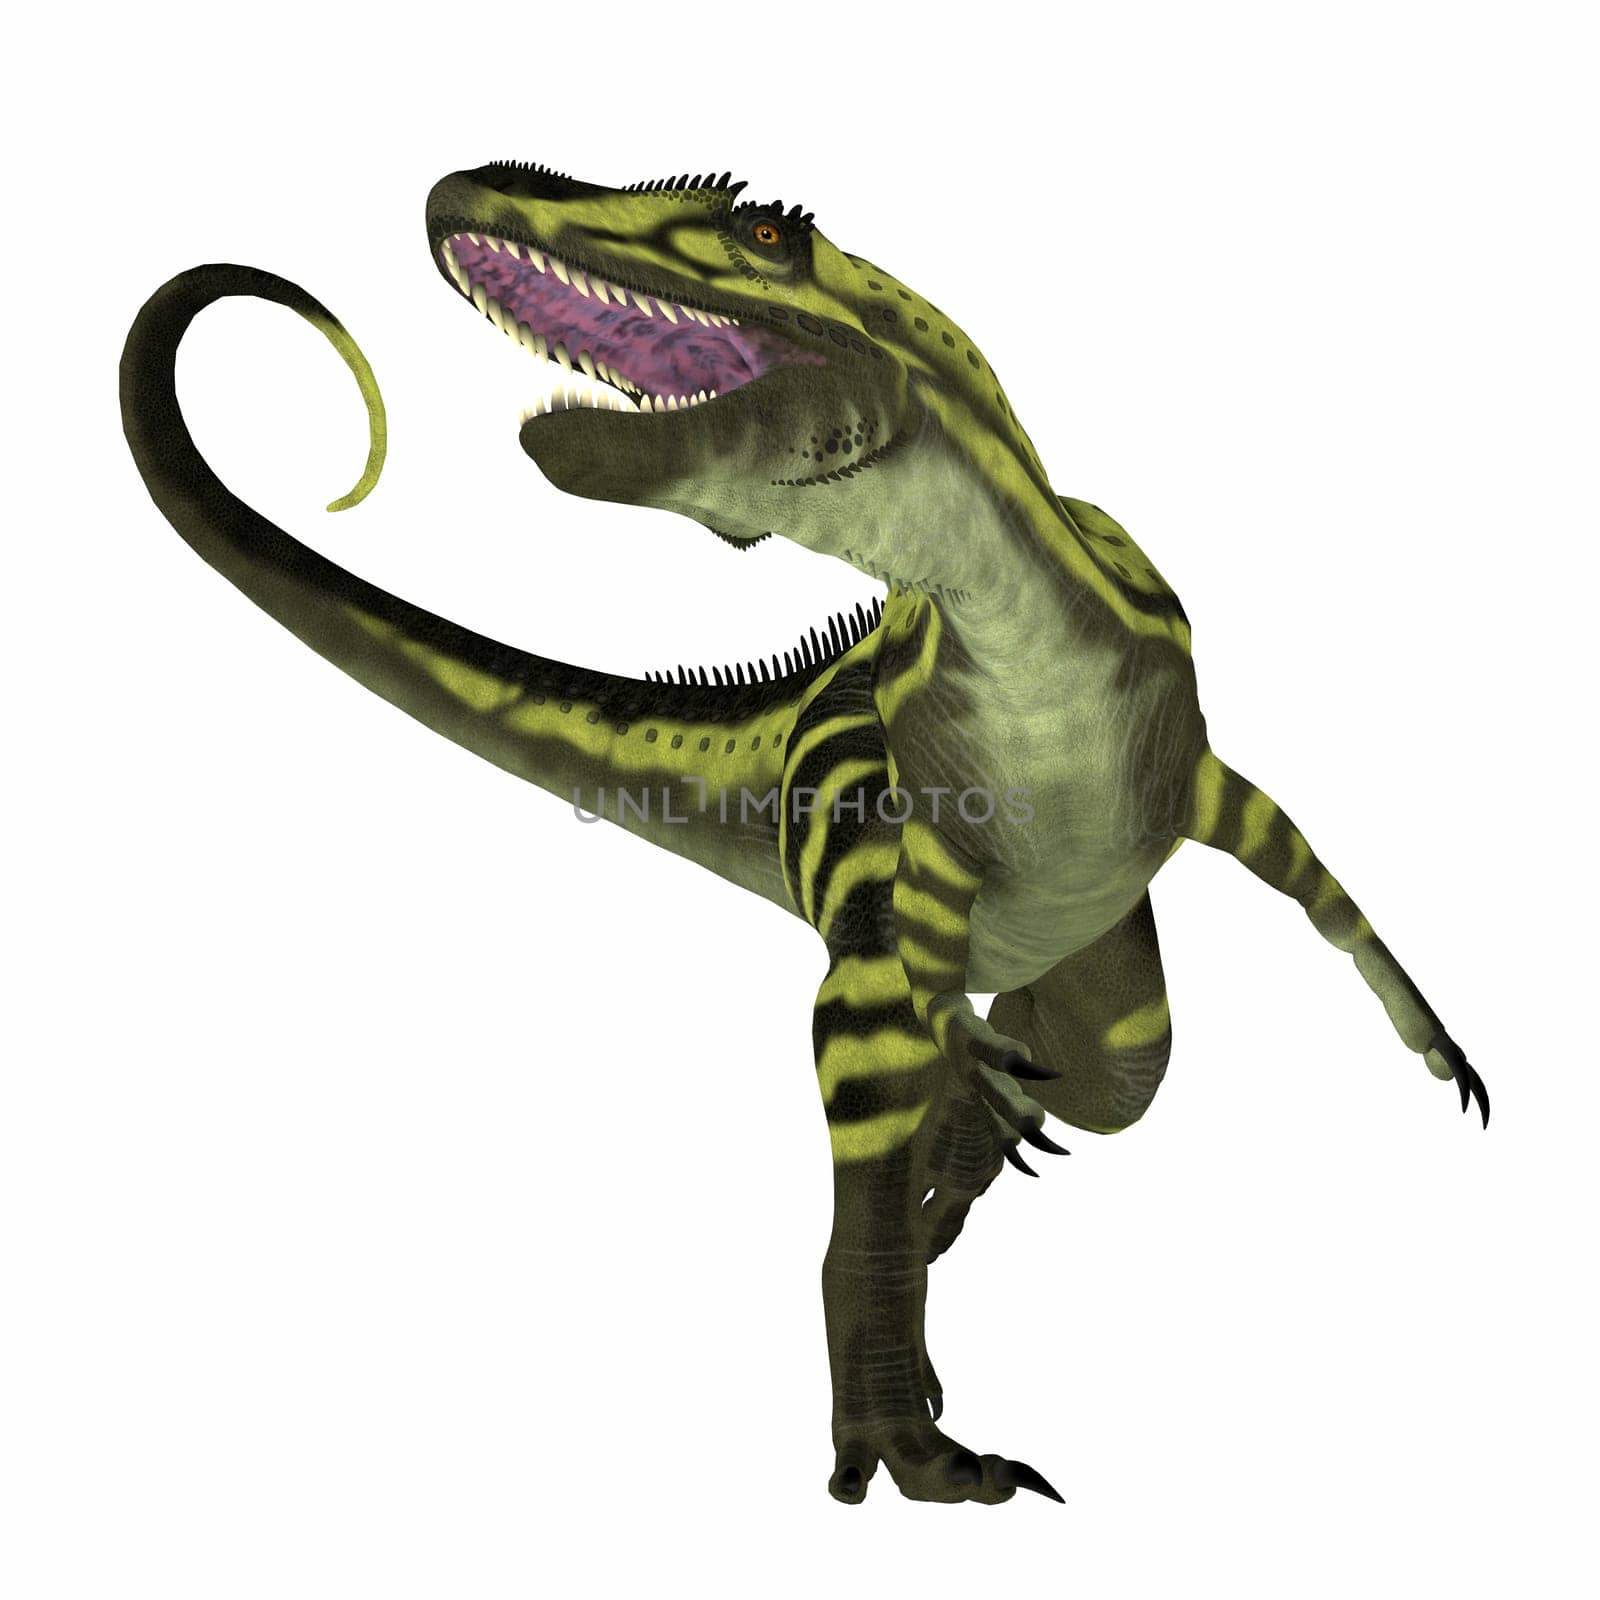 Torvosaurus was a carnivorous theropod dinosaur that lived in Colorado and Portugal during the Jurassic Period.